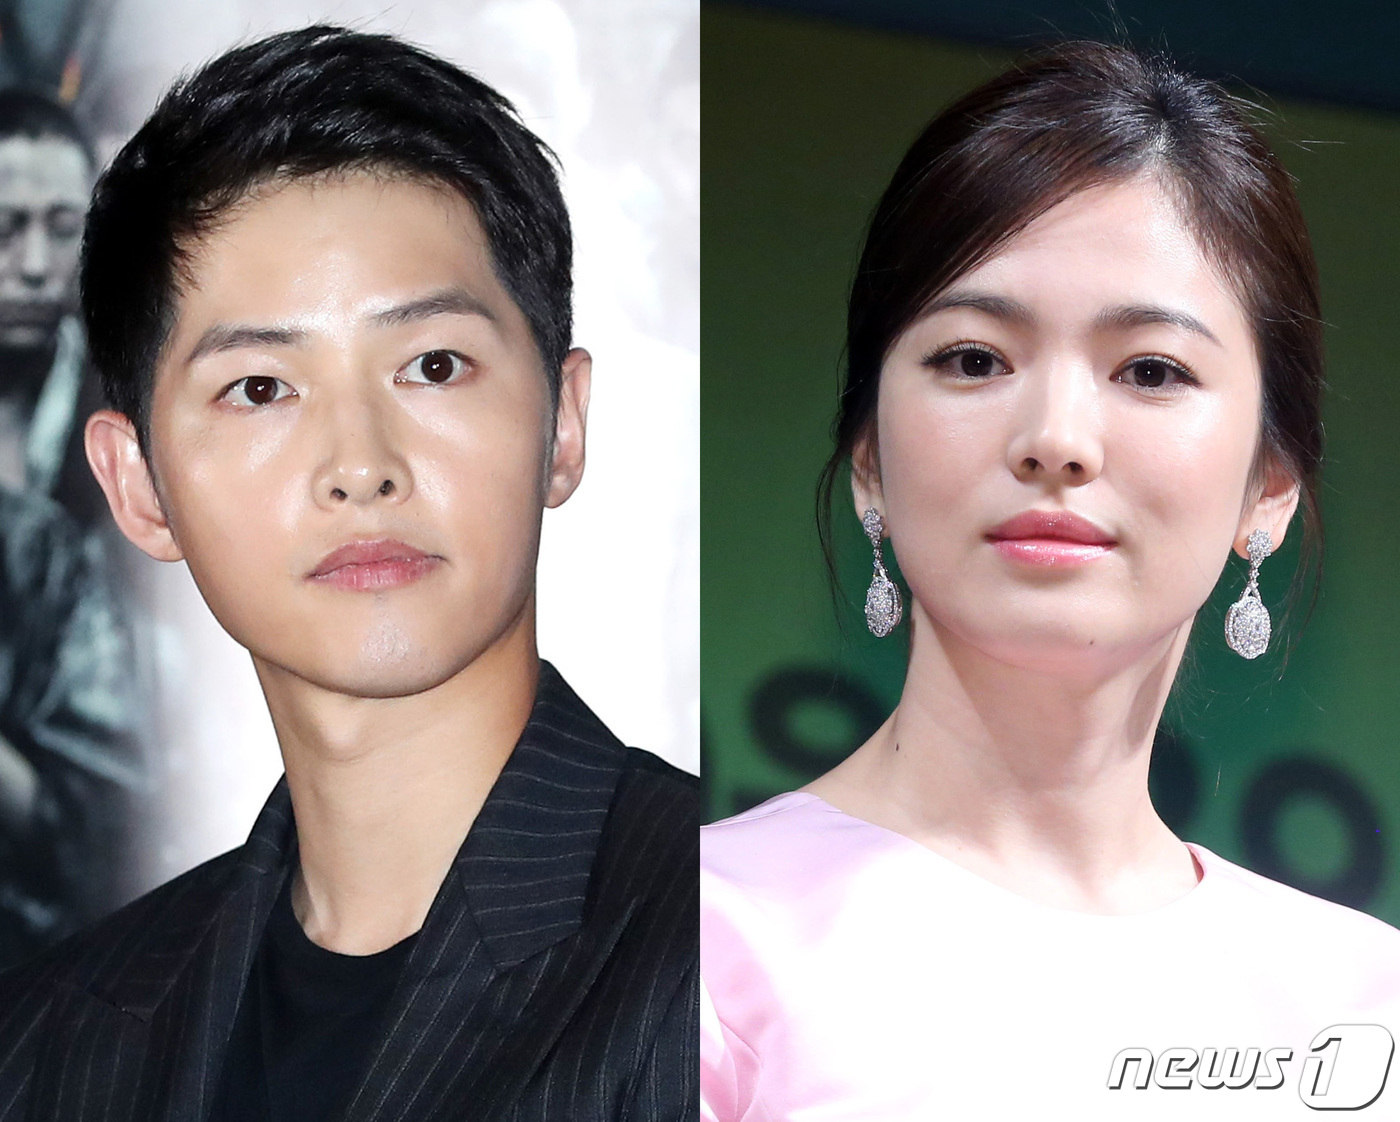 Seoul = = The reason why Actors Song Joong-ki and Song Hye-kyo officially unresponsive to the reuniting report from China is confirmed because the report is unfounded.Song Joong-ki and Song Hye-kyo have not officially announced their position on the recent re-uniting report from China.We believe that it is also a personal address and that the contents of the report are not worth responding to, the two aides said on Sunday.Another official said, The two people are walking their own way, and because of the reunion, they are seeing it as an absurd rumor.Meanwhile, as Song Hye-kyo and Song Joong-kis reunion spread around Chinese netizens, Chinese media have also reported.The reunion rumor began when a photo of Song Hye-kyo appeared to have put the The Wedding Ring back on.The picture of the problem spreading in Baidu, a Chinese portal site, is a picture of a magazine recently released by a magazine.On the 17th (local time), Taiwans China City reported that the two people were reunited under the title of Song Song Couple Reunited? Song Hye-kyos The Wedding Ring is Re-embraced.Chinas Shibo said, There are still many people who want to see the reunion of the two people.In Baidu, Song Hye-kyos reuniting theory is not certain, and the two people say zero about the possibility of reuniting, but added, The scene where the two people came together (in the Drama) is like an idol and lives in the minds of viewers.Song Hye-kyo and Song Joong-ki married in October 2017 after dating as the main Actor of the Drama Dawn of the Sun which was broadcast in 2016.However, after a year and nine months of marriage, he was dismissed in June, and after the divorce settlement at the end of July, he finished the divorce process without alimony or property division.The Chinese claim and report, Its just a rumor of a fugitive.